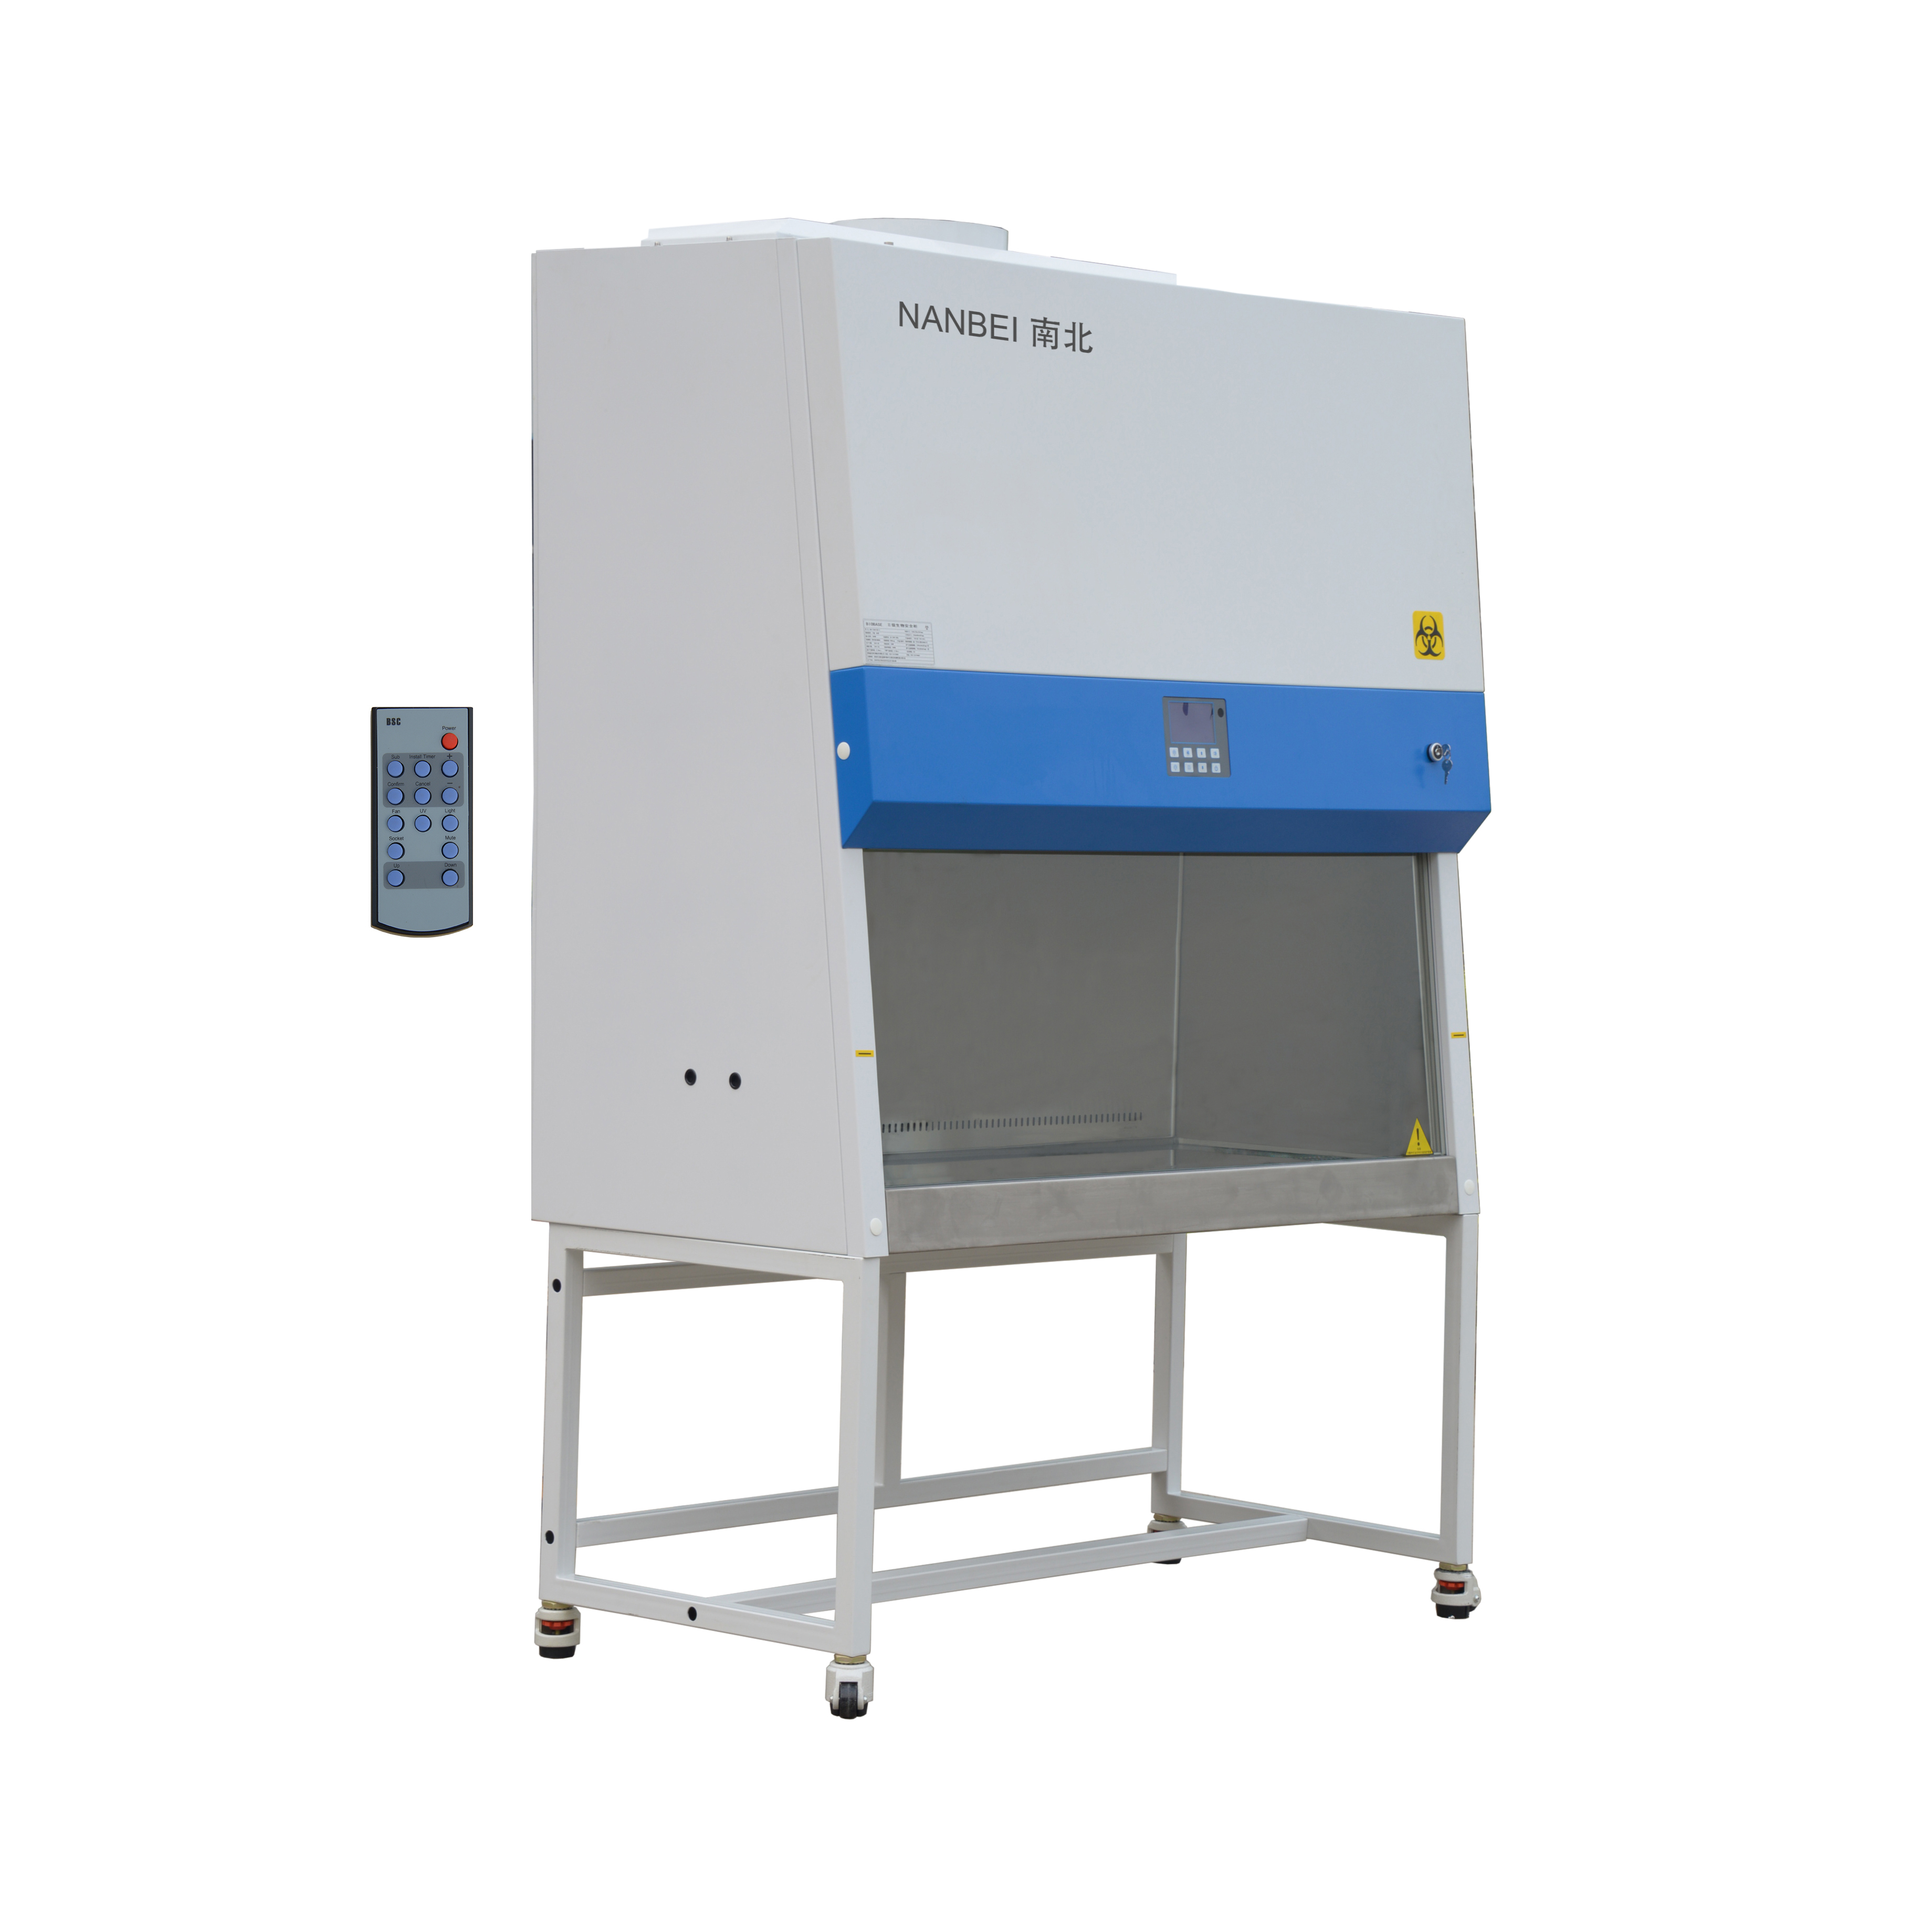 100% Exhaust double person Biological safety cabinet